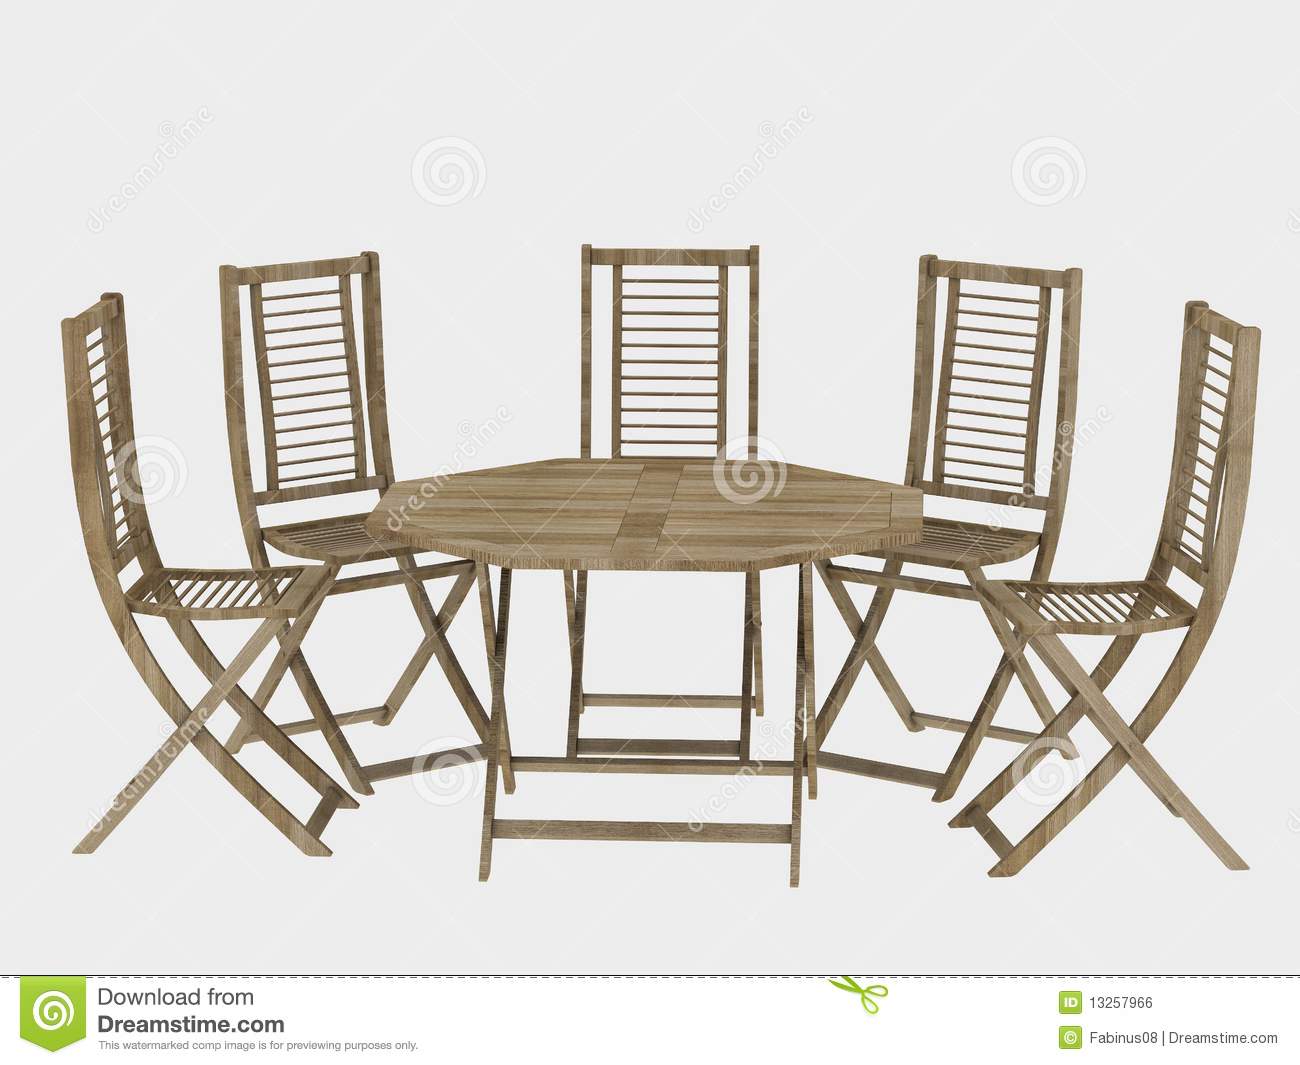 Outdoor Patio Furniture Royalty Free Stock Image   Image  13257966